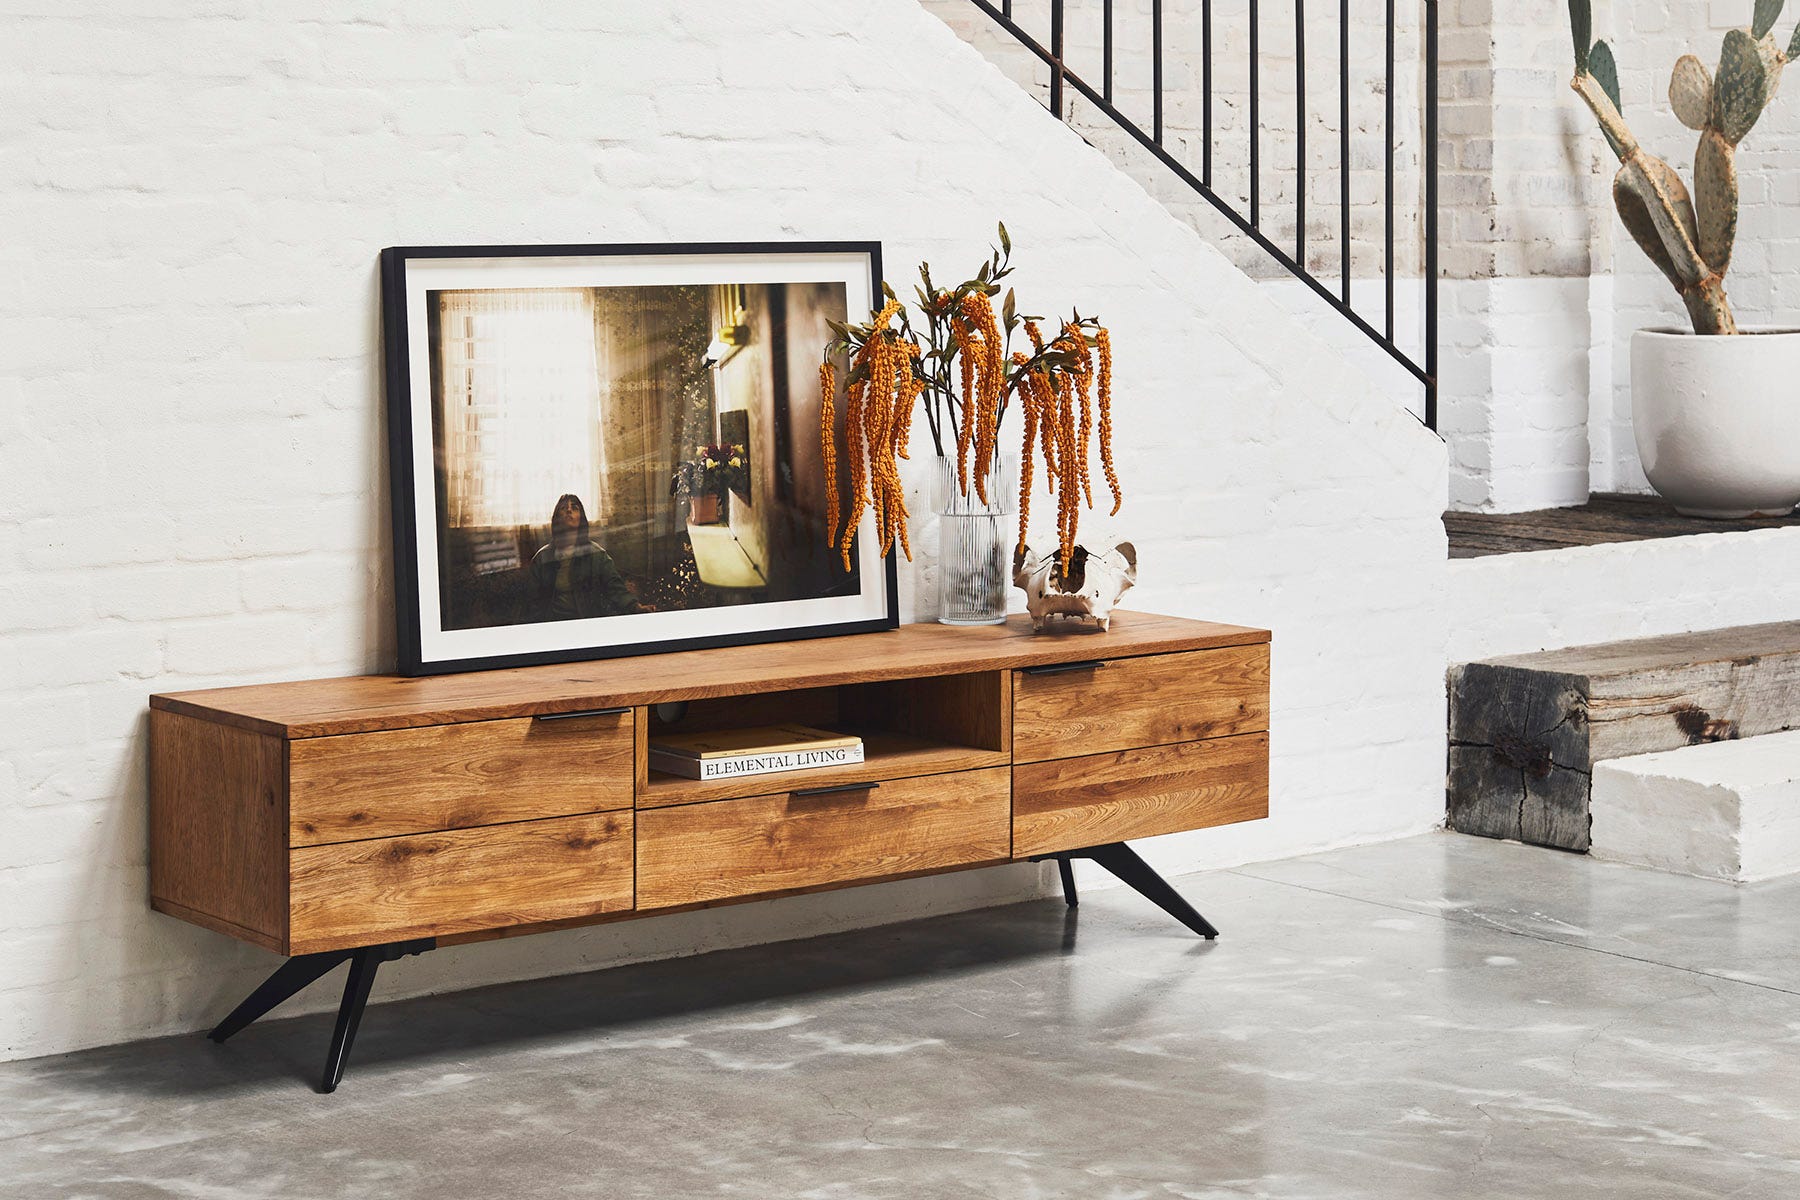 How to choose a TV unit